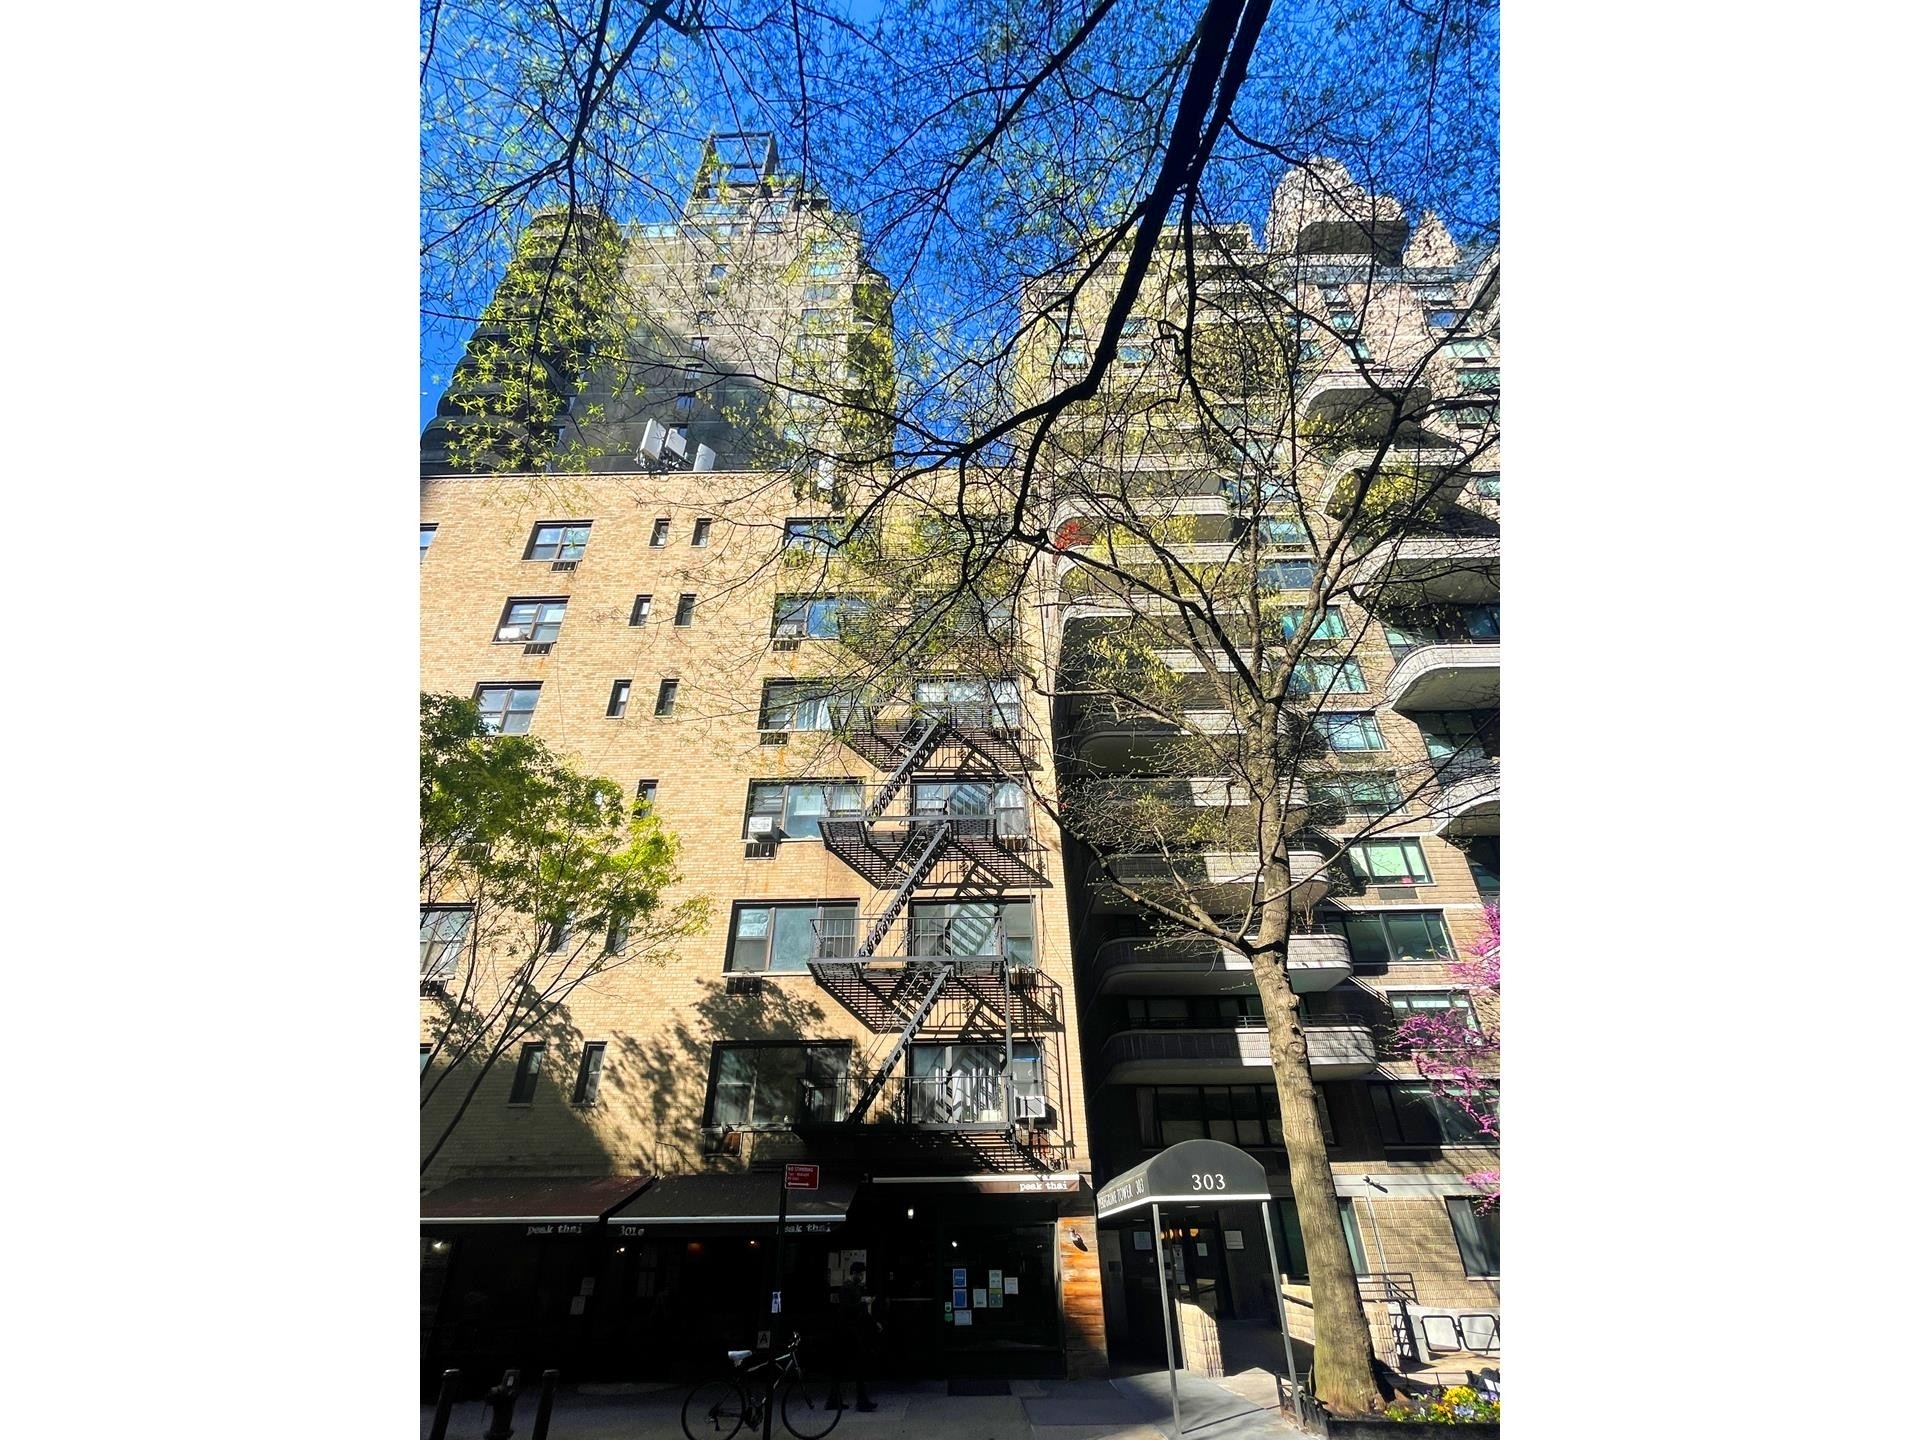 13. Condominiums for Sale at Peregrine Tower, 303 E 49TH ST, 9 Turtle Bay, New York, New York 10022